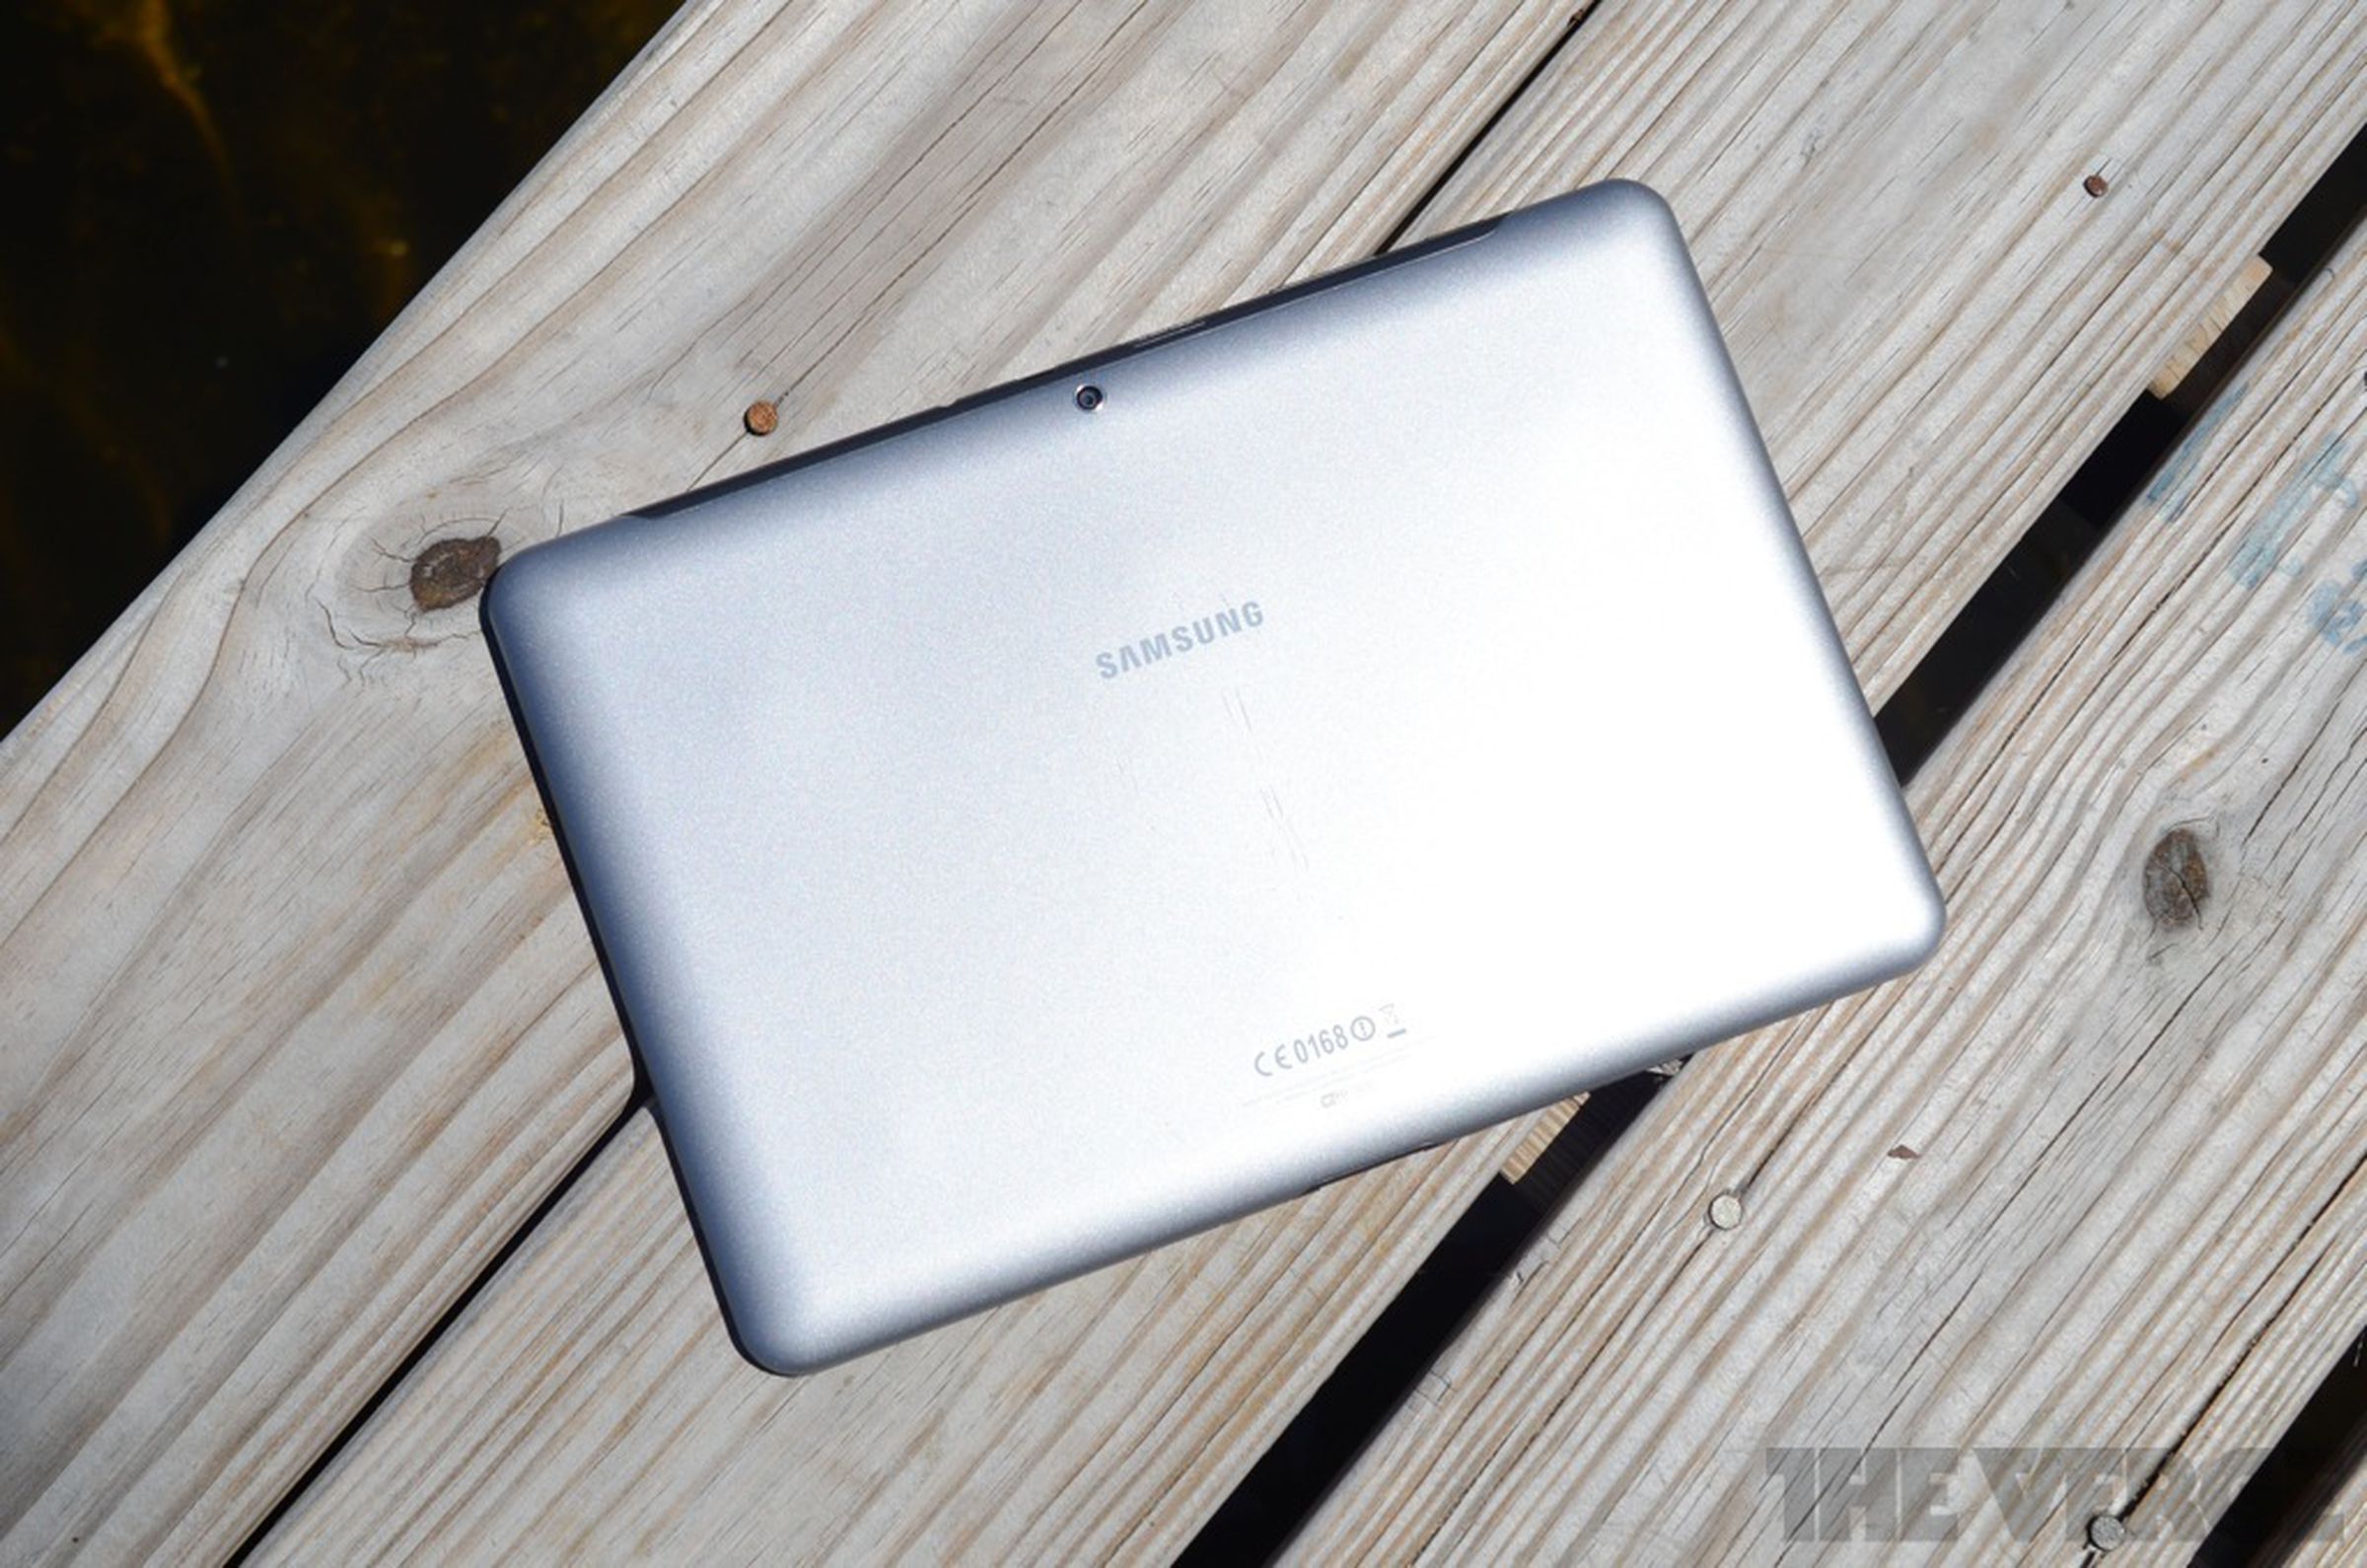 Samsung Galaxy Tab 2 10.1 review pictures